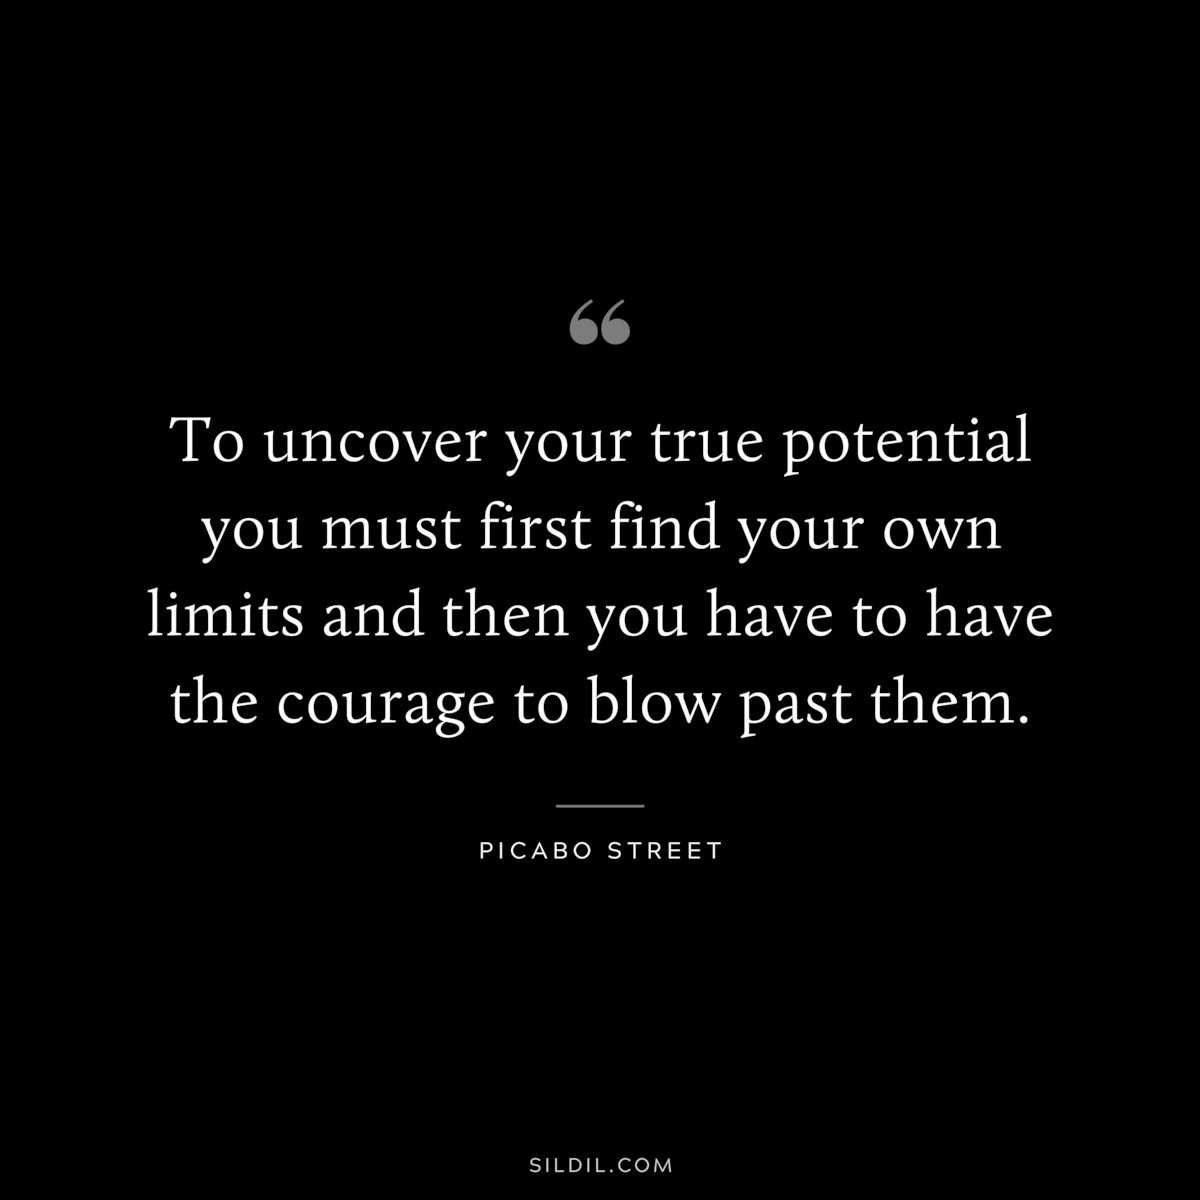 To uncover your true potential you must first find your own limits and then you have to have the courage to blow past them. ― Picabo Street